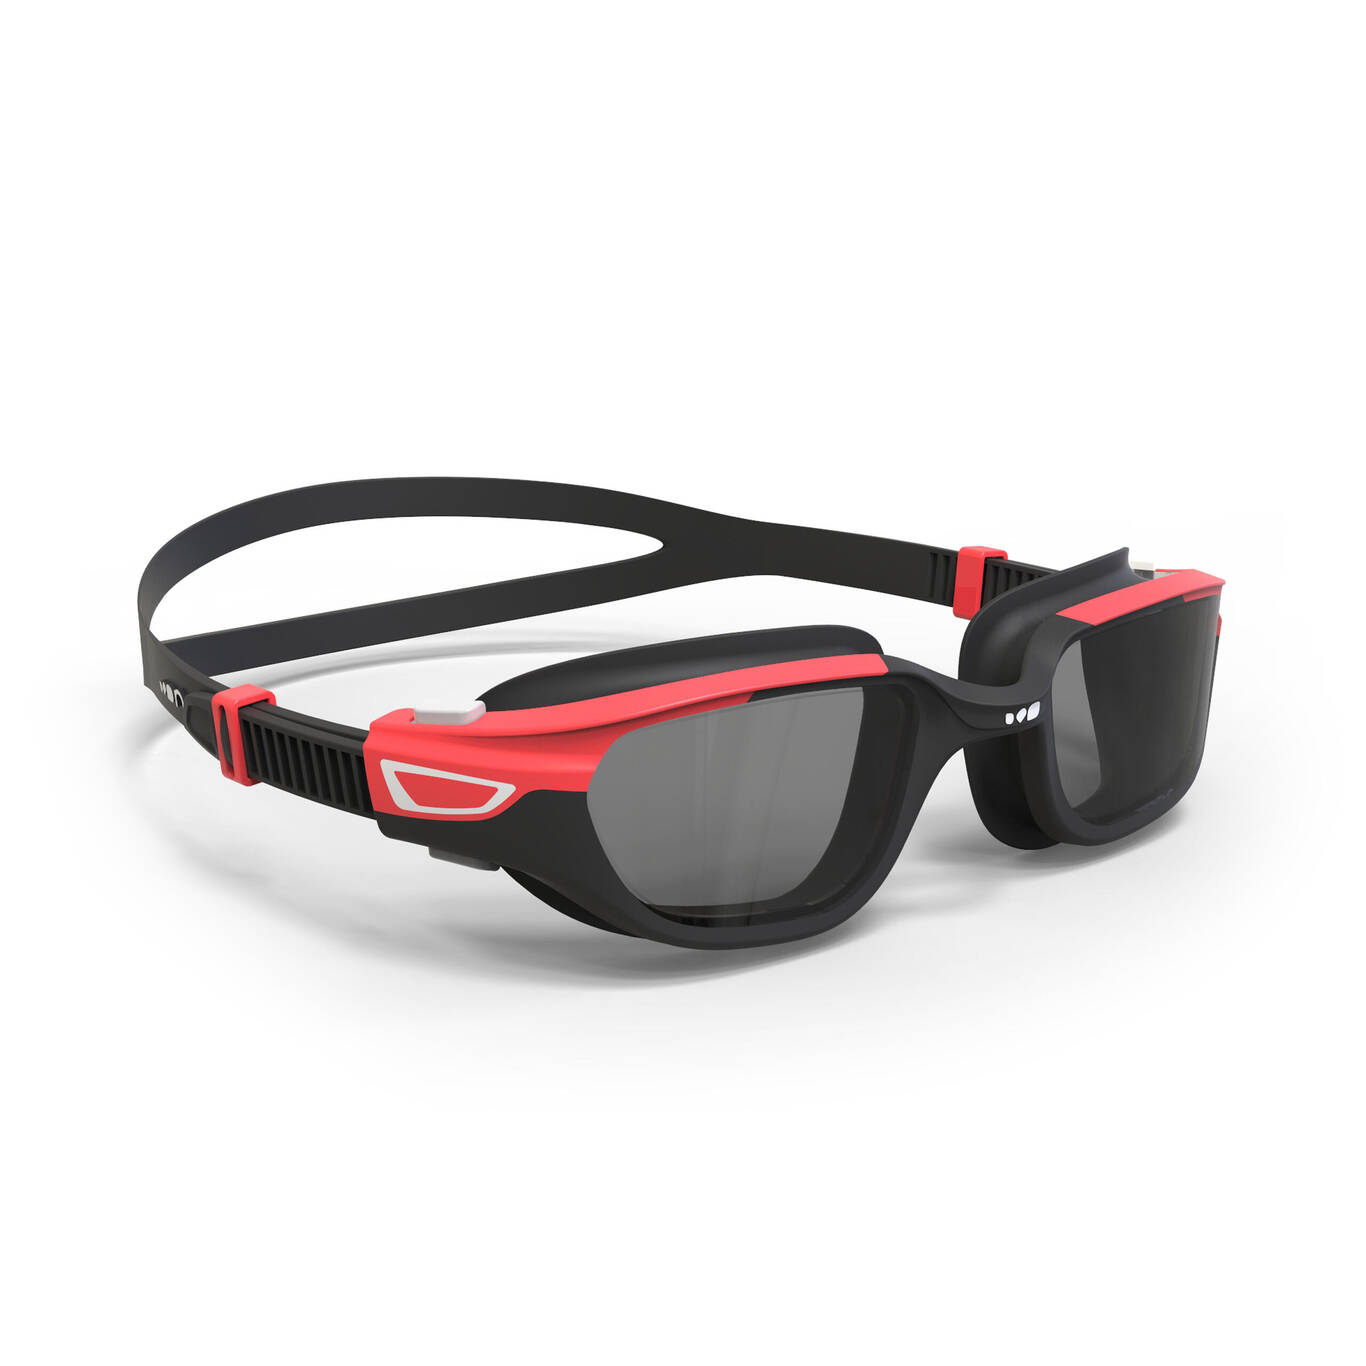 SPIRIT 500 ADULT SWIMMING GOGGLES - SMOKED LENSES - RED / BLACK